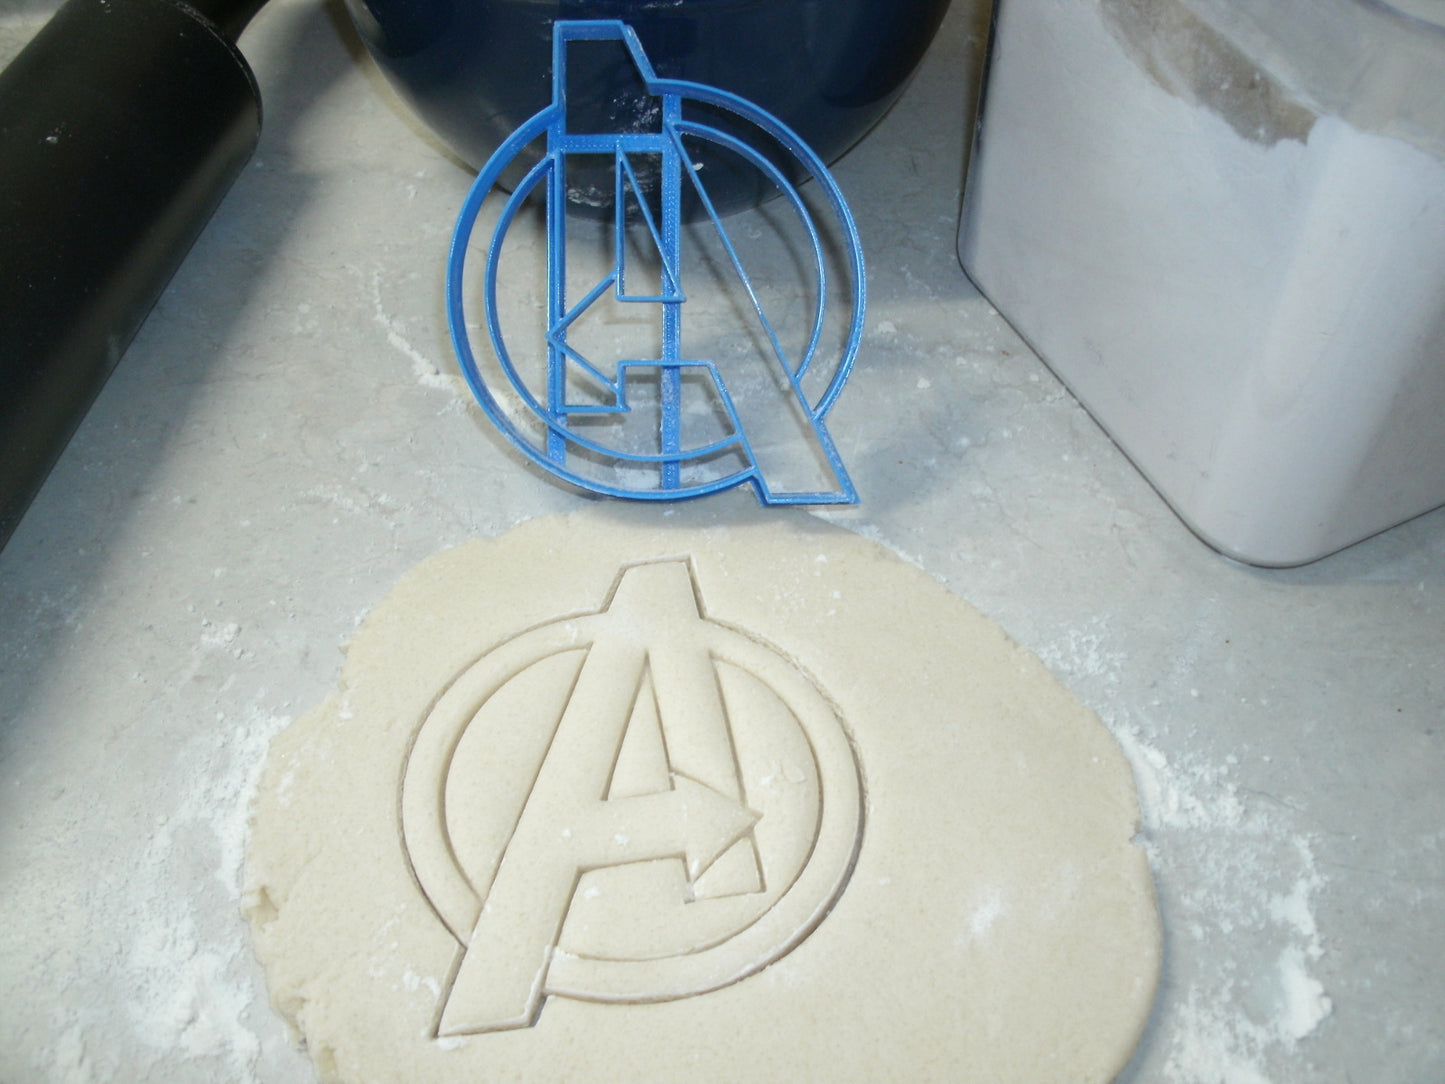 Avengers Logo Marvel Superheroes Cookie Cutter Baking Tool Made In USA PR584